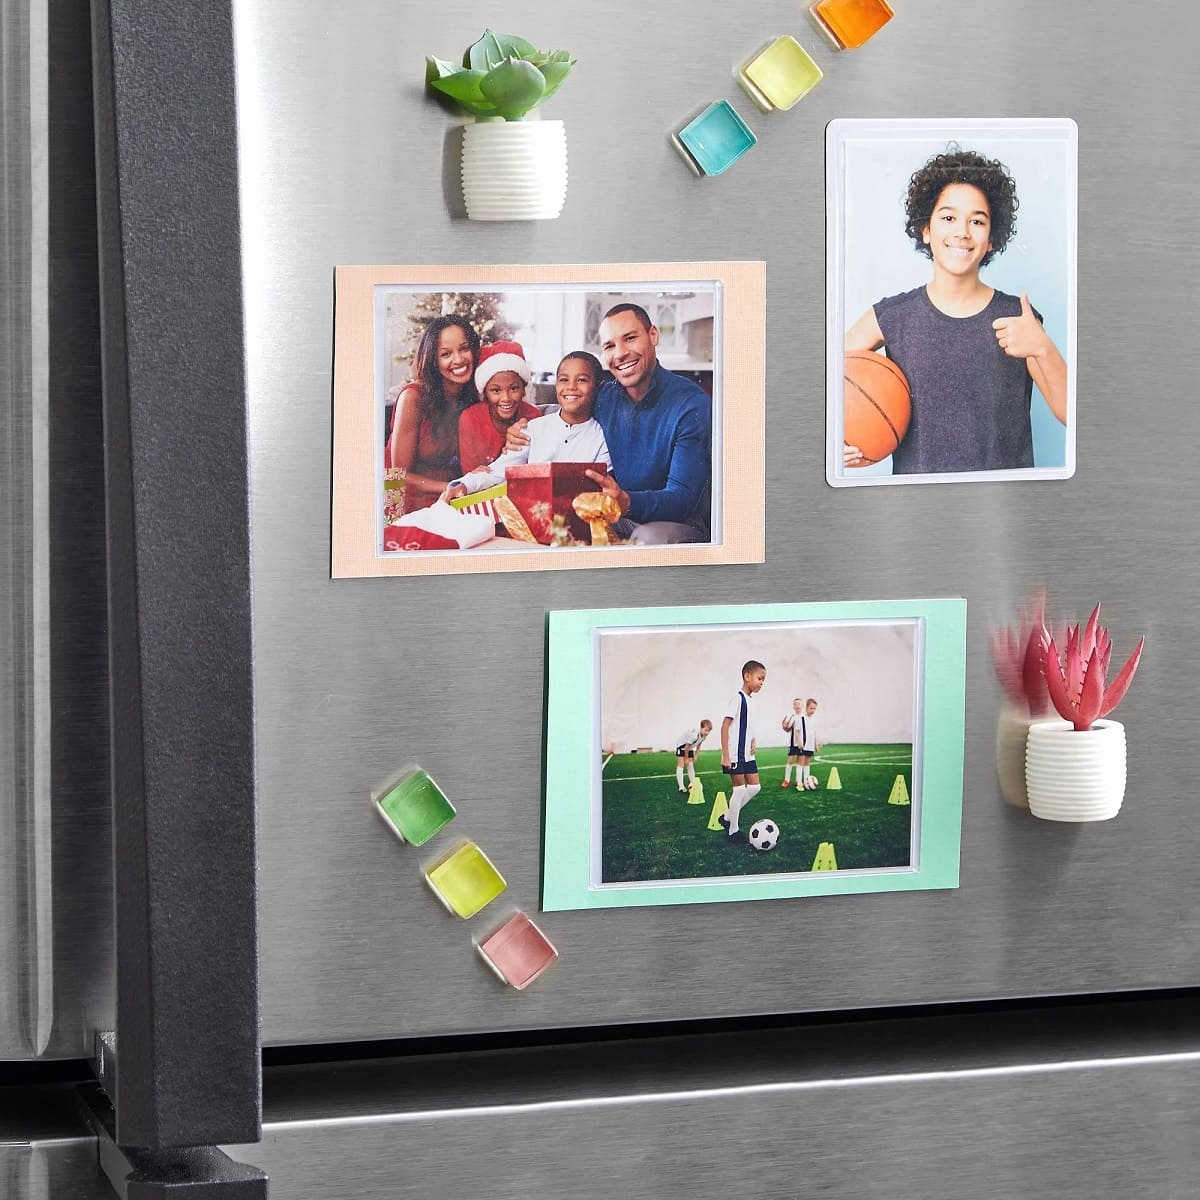 15 Pack Magnet Photo Frame Refrigerator 4X6 Magnetic Picture 15 PACK Black